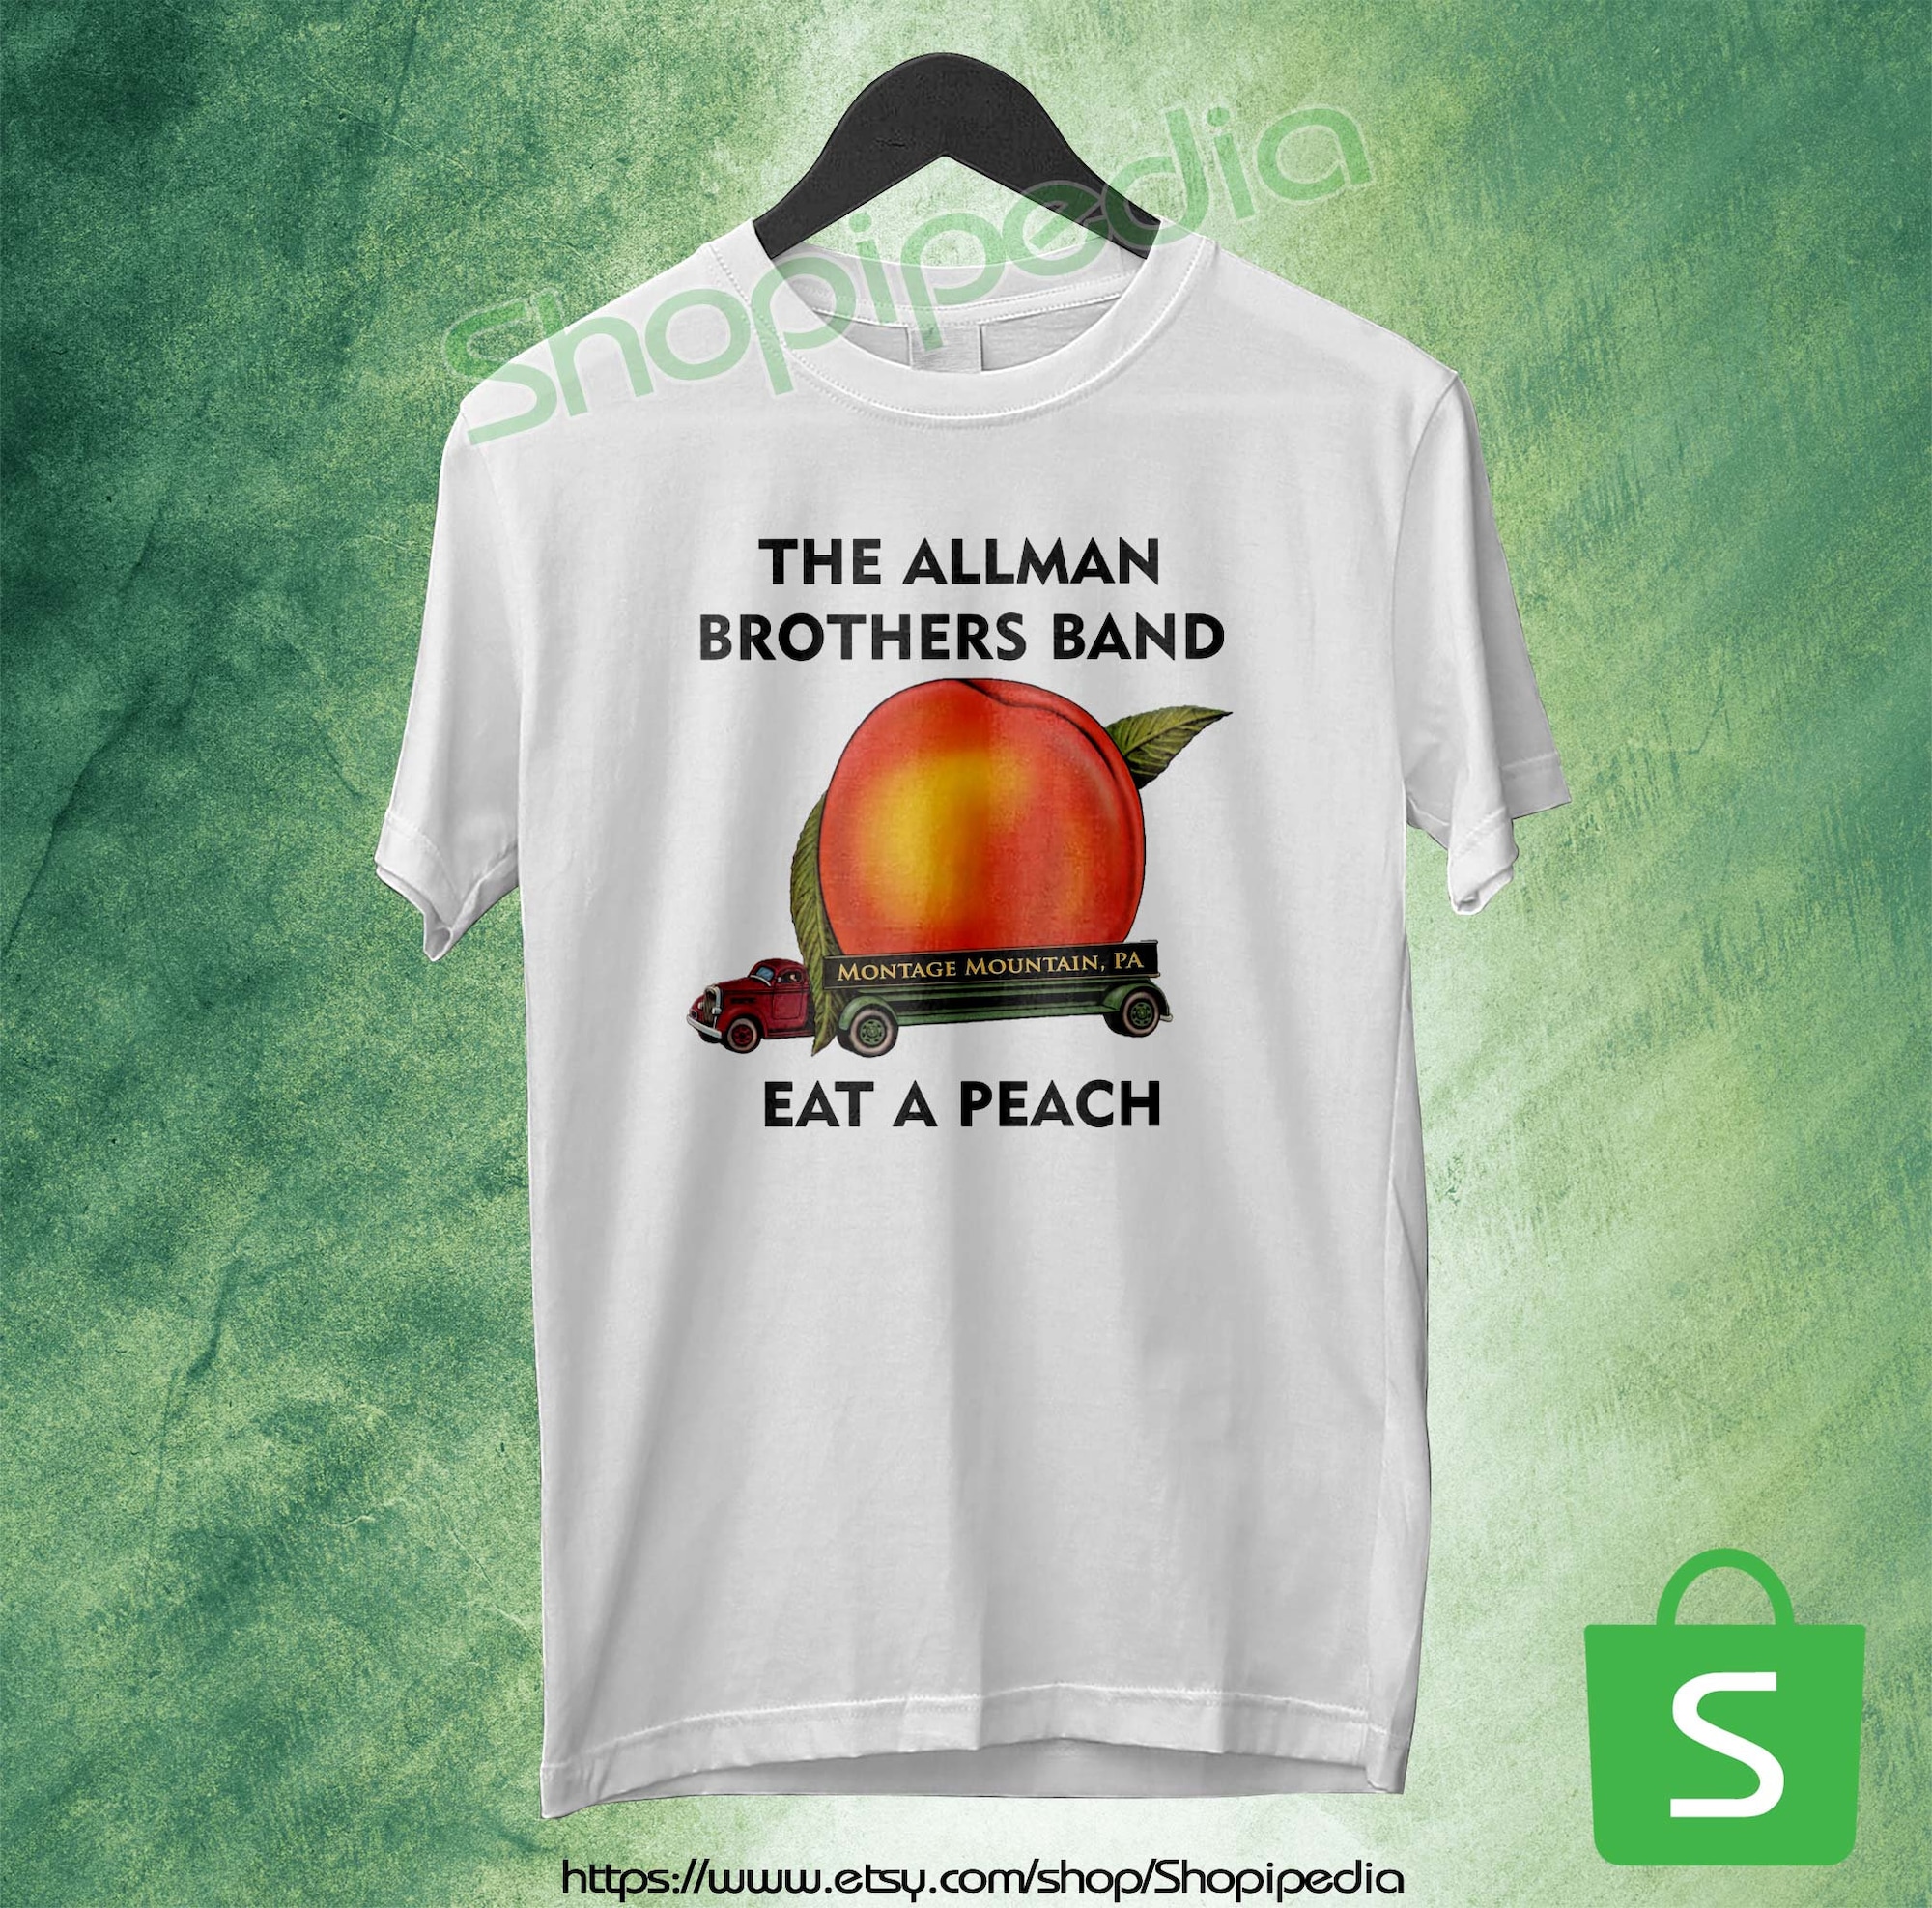 Discover The Allman Brothers Band Eat a Peach Vintage T-shirt